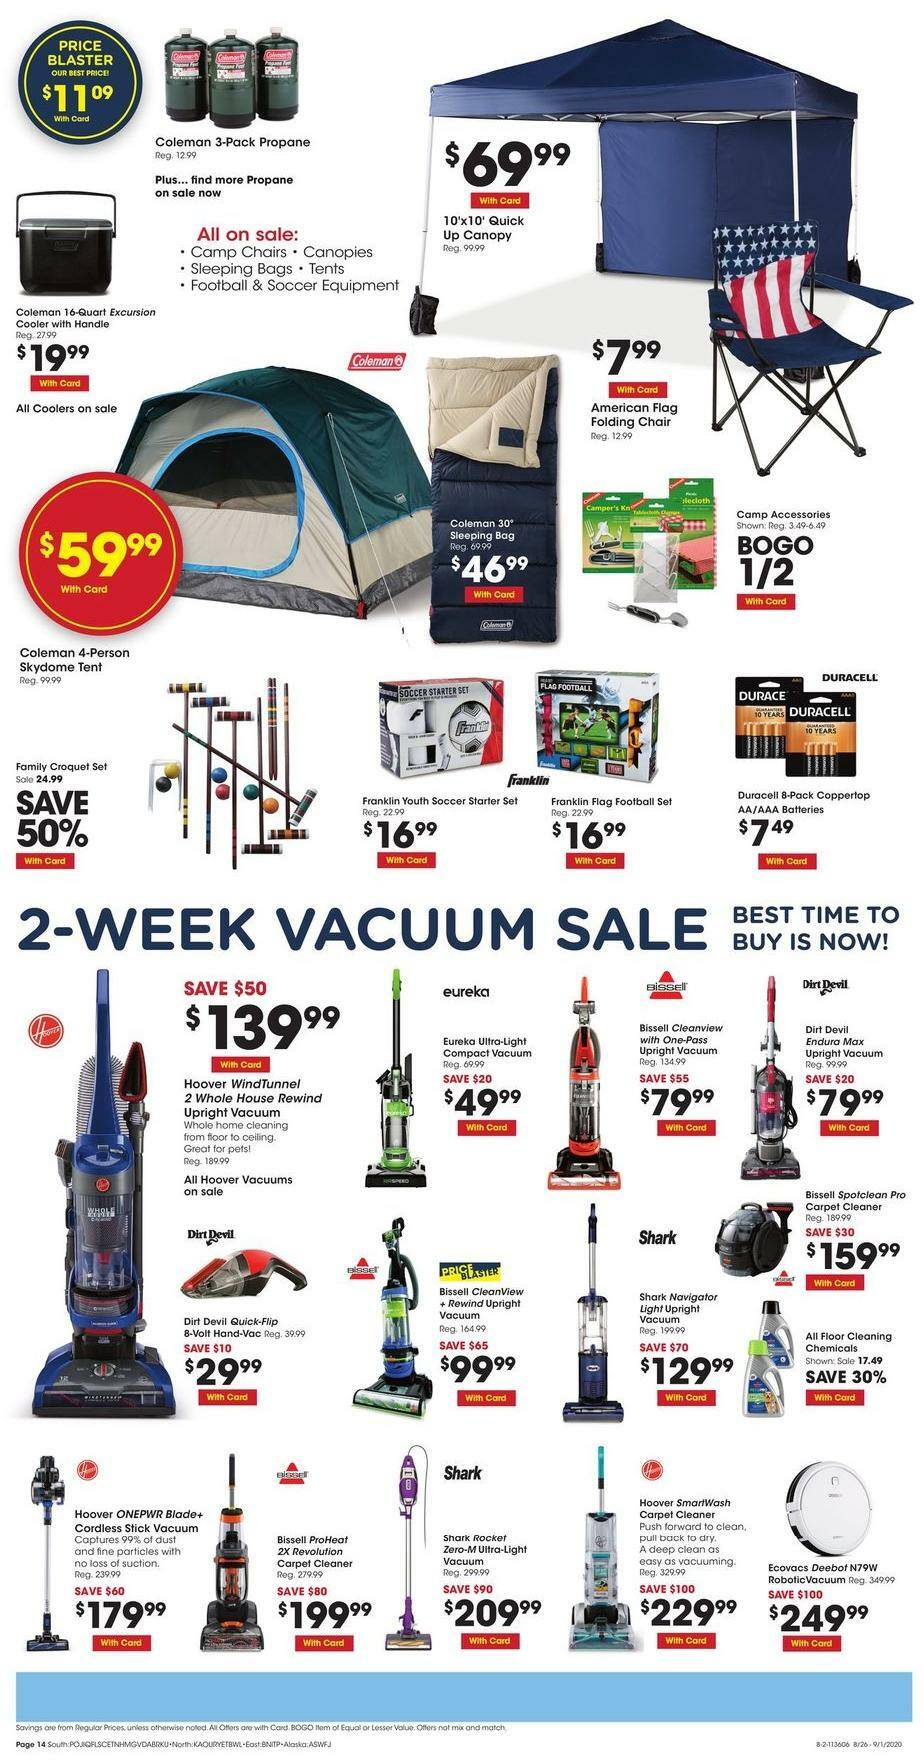 Fred Meyer Weekly Ad from August 26